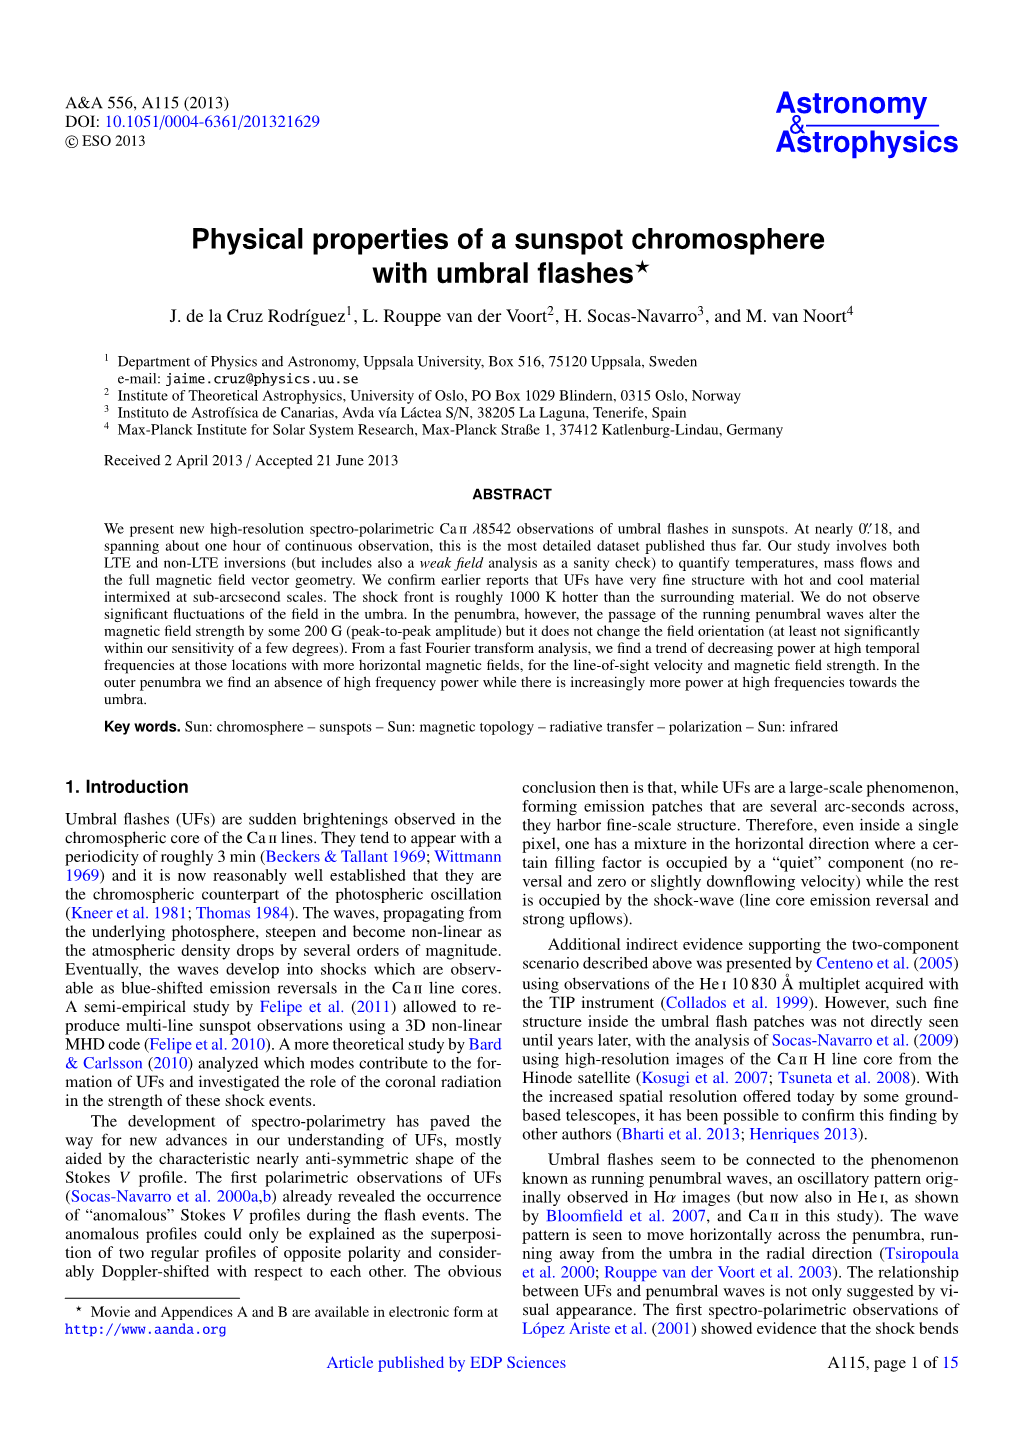 Physical Properties of a Sunspot Chromosphere with Umbral Flashes⋆